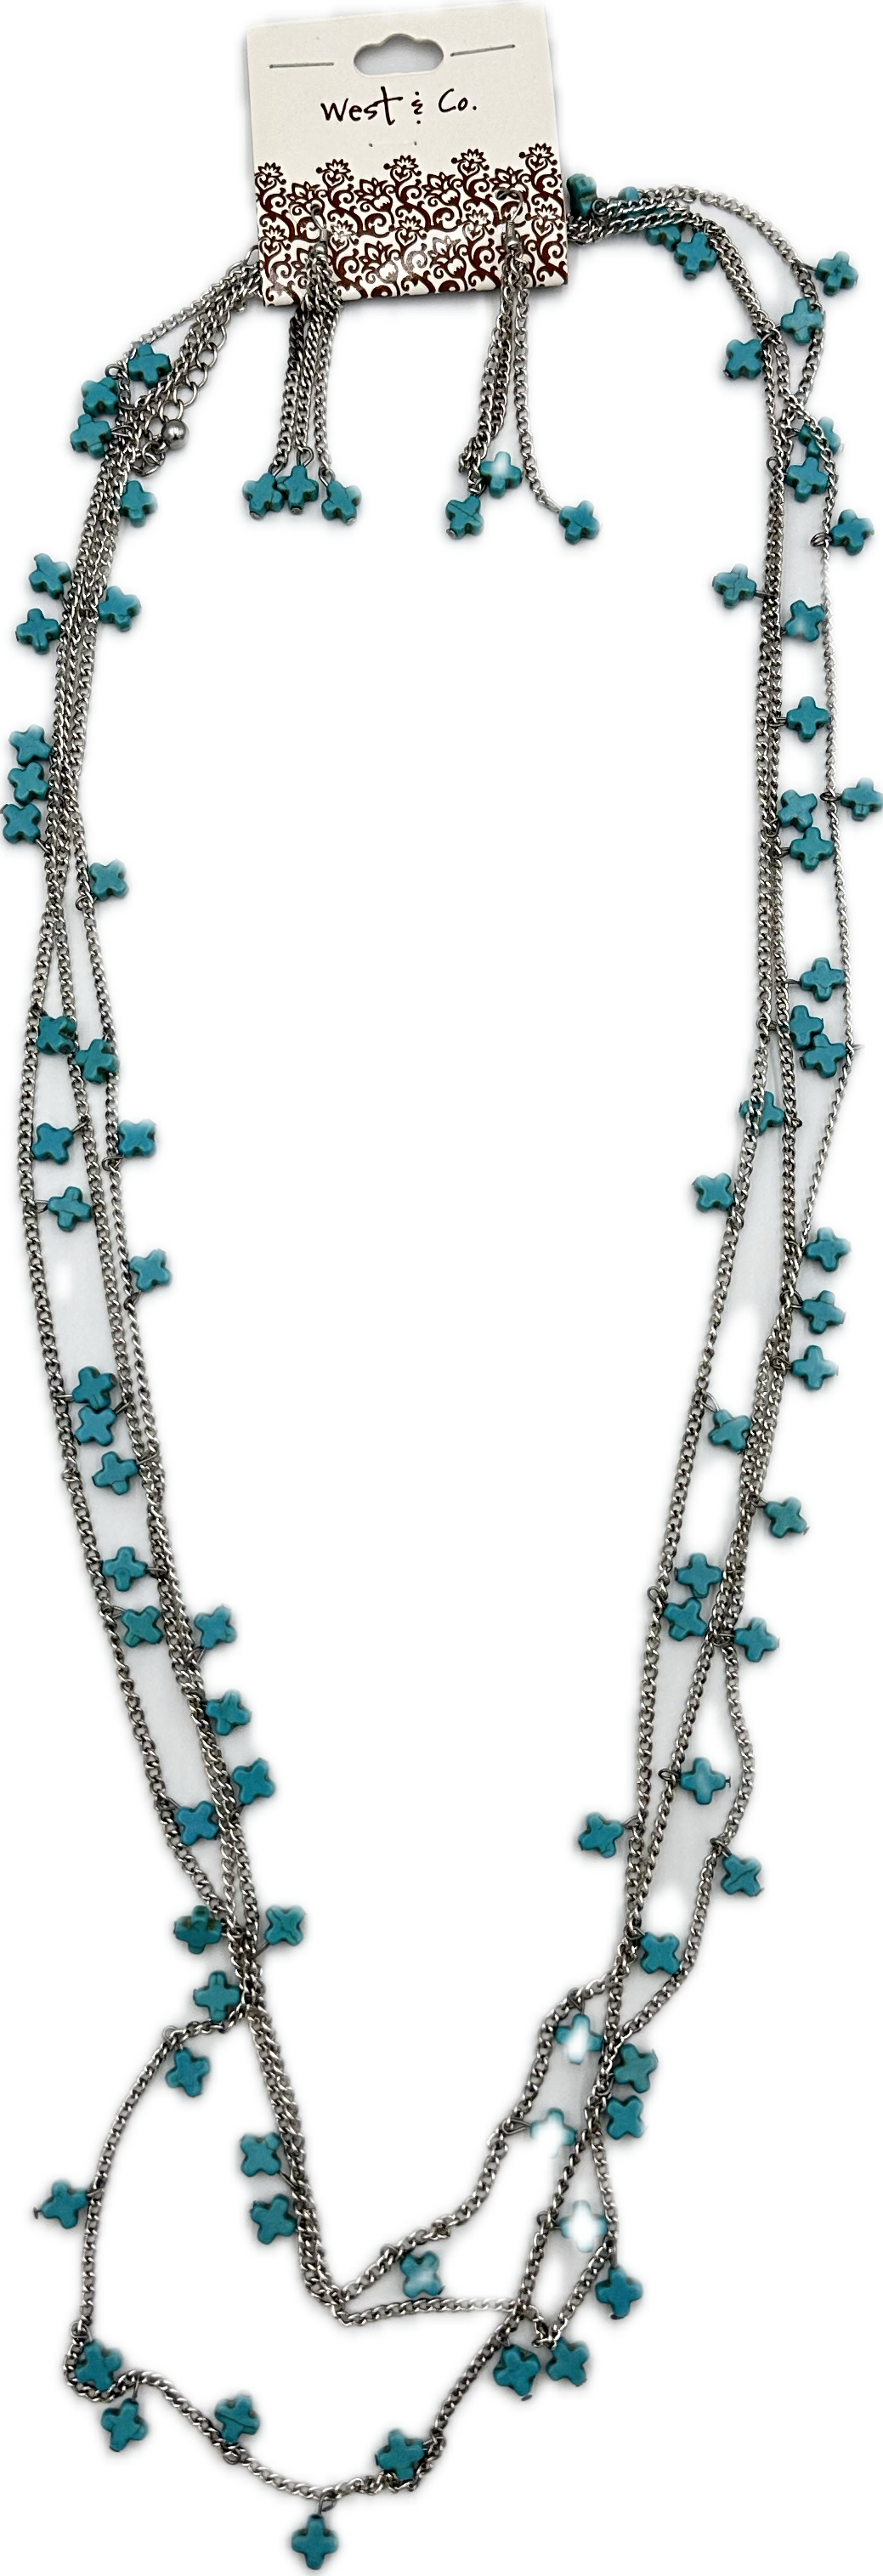 3 Layer Turquoise Cross Necklace with Matching Earrings